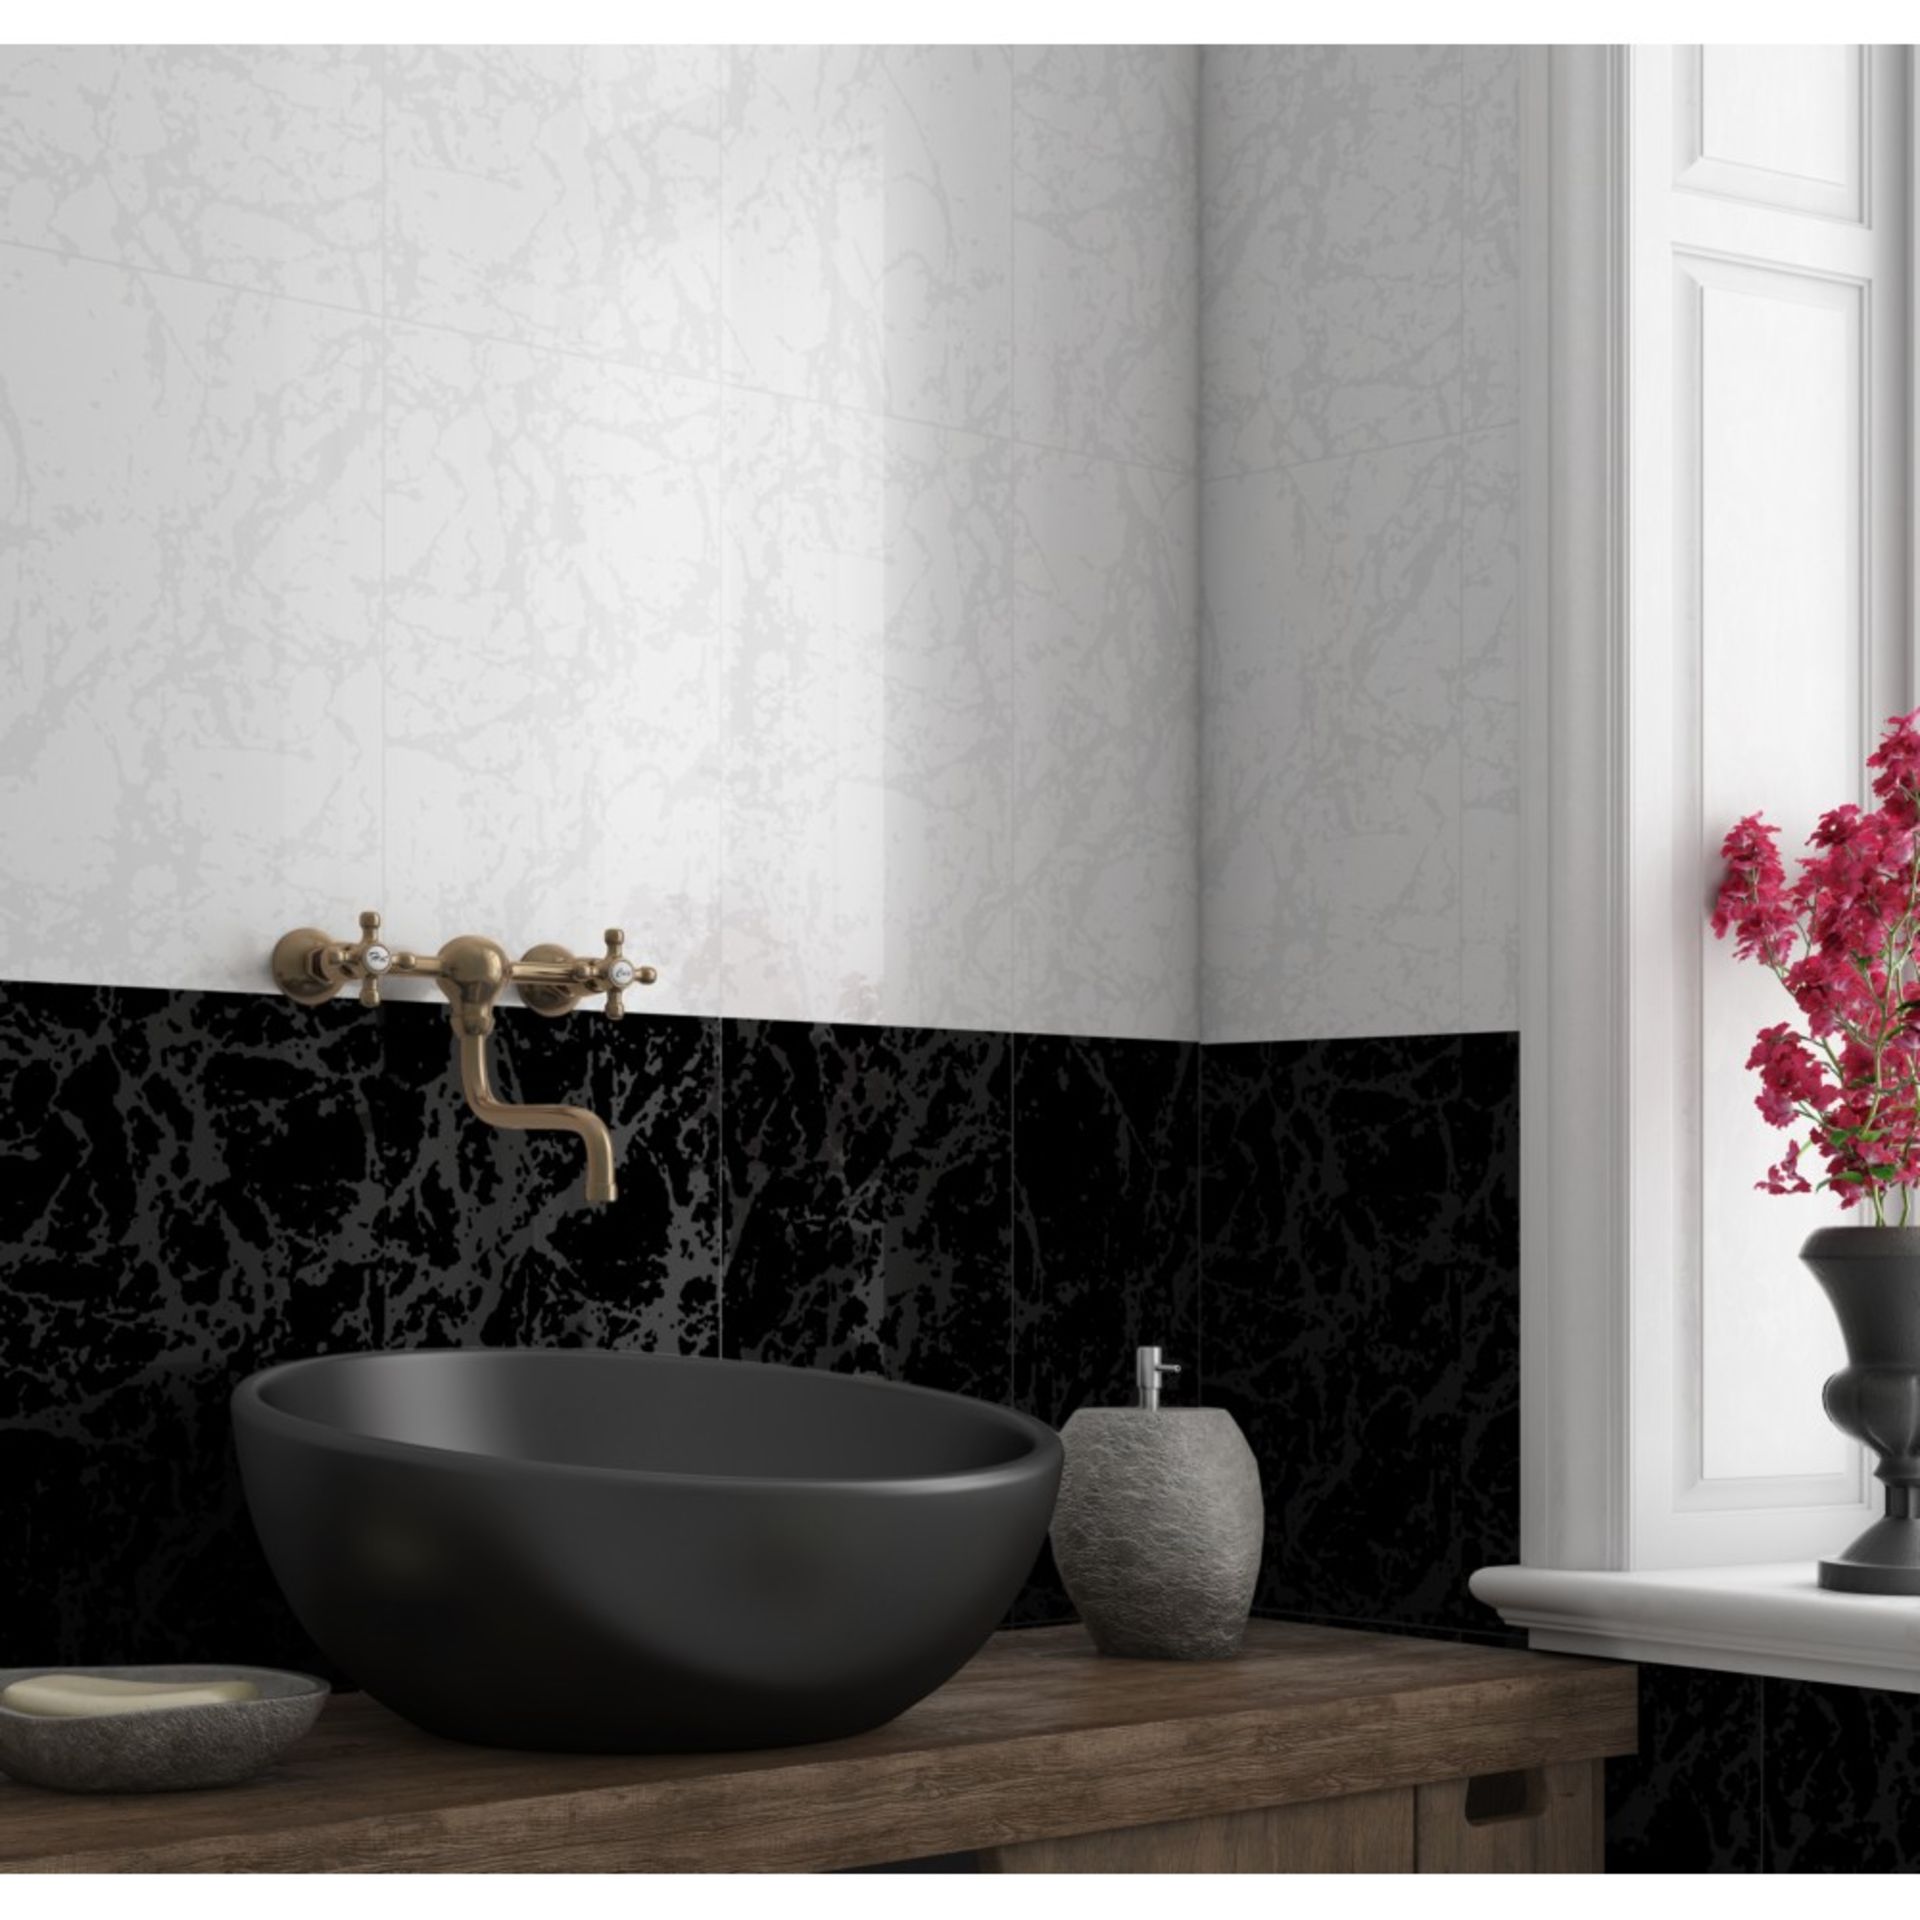 NEW 11.34M2 Ubeda Black Floor and Wall Tiles. 450x450mm per tile, 1.62m2 per pack. 8.7mm thick....